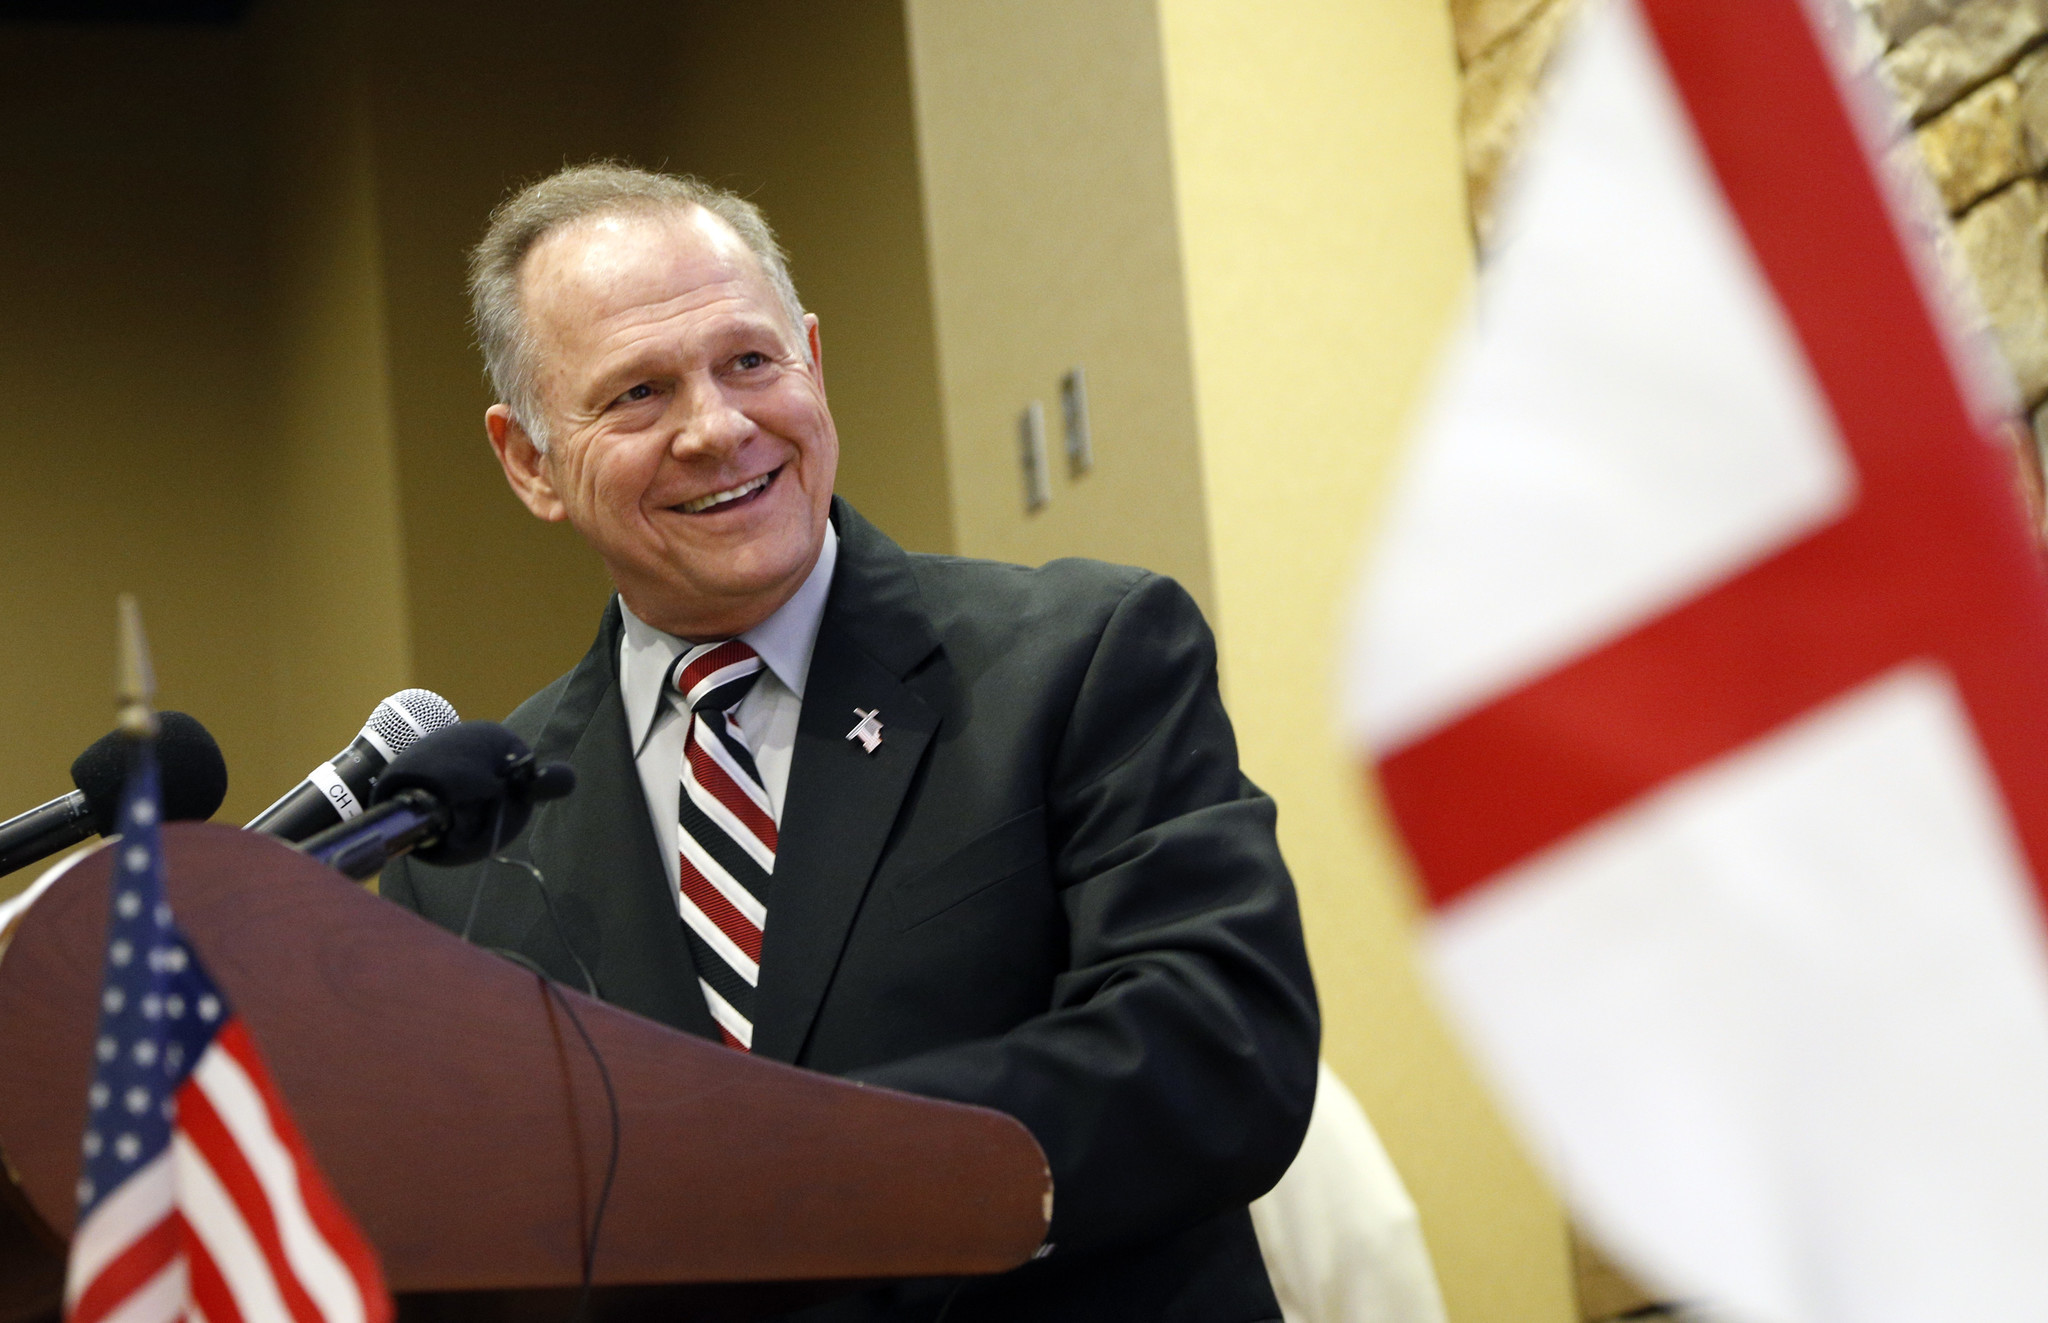 http://www.chicagotribune.com/news/opinion/commentary/ct-roy-moore-hypocrite-christian-20171114-story.html